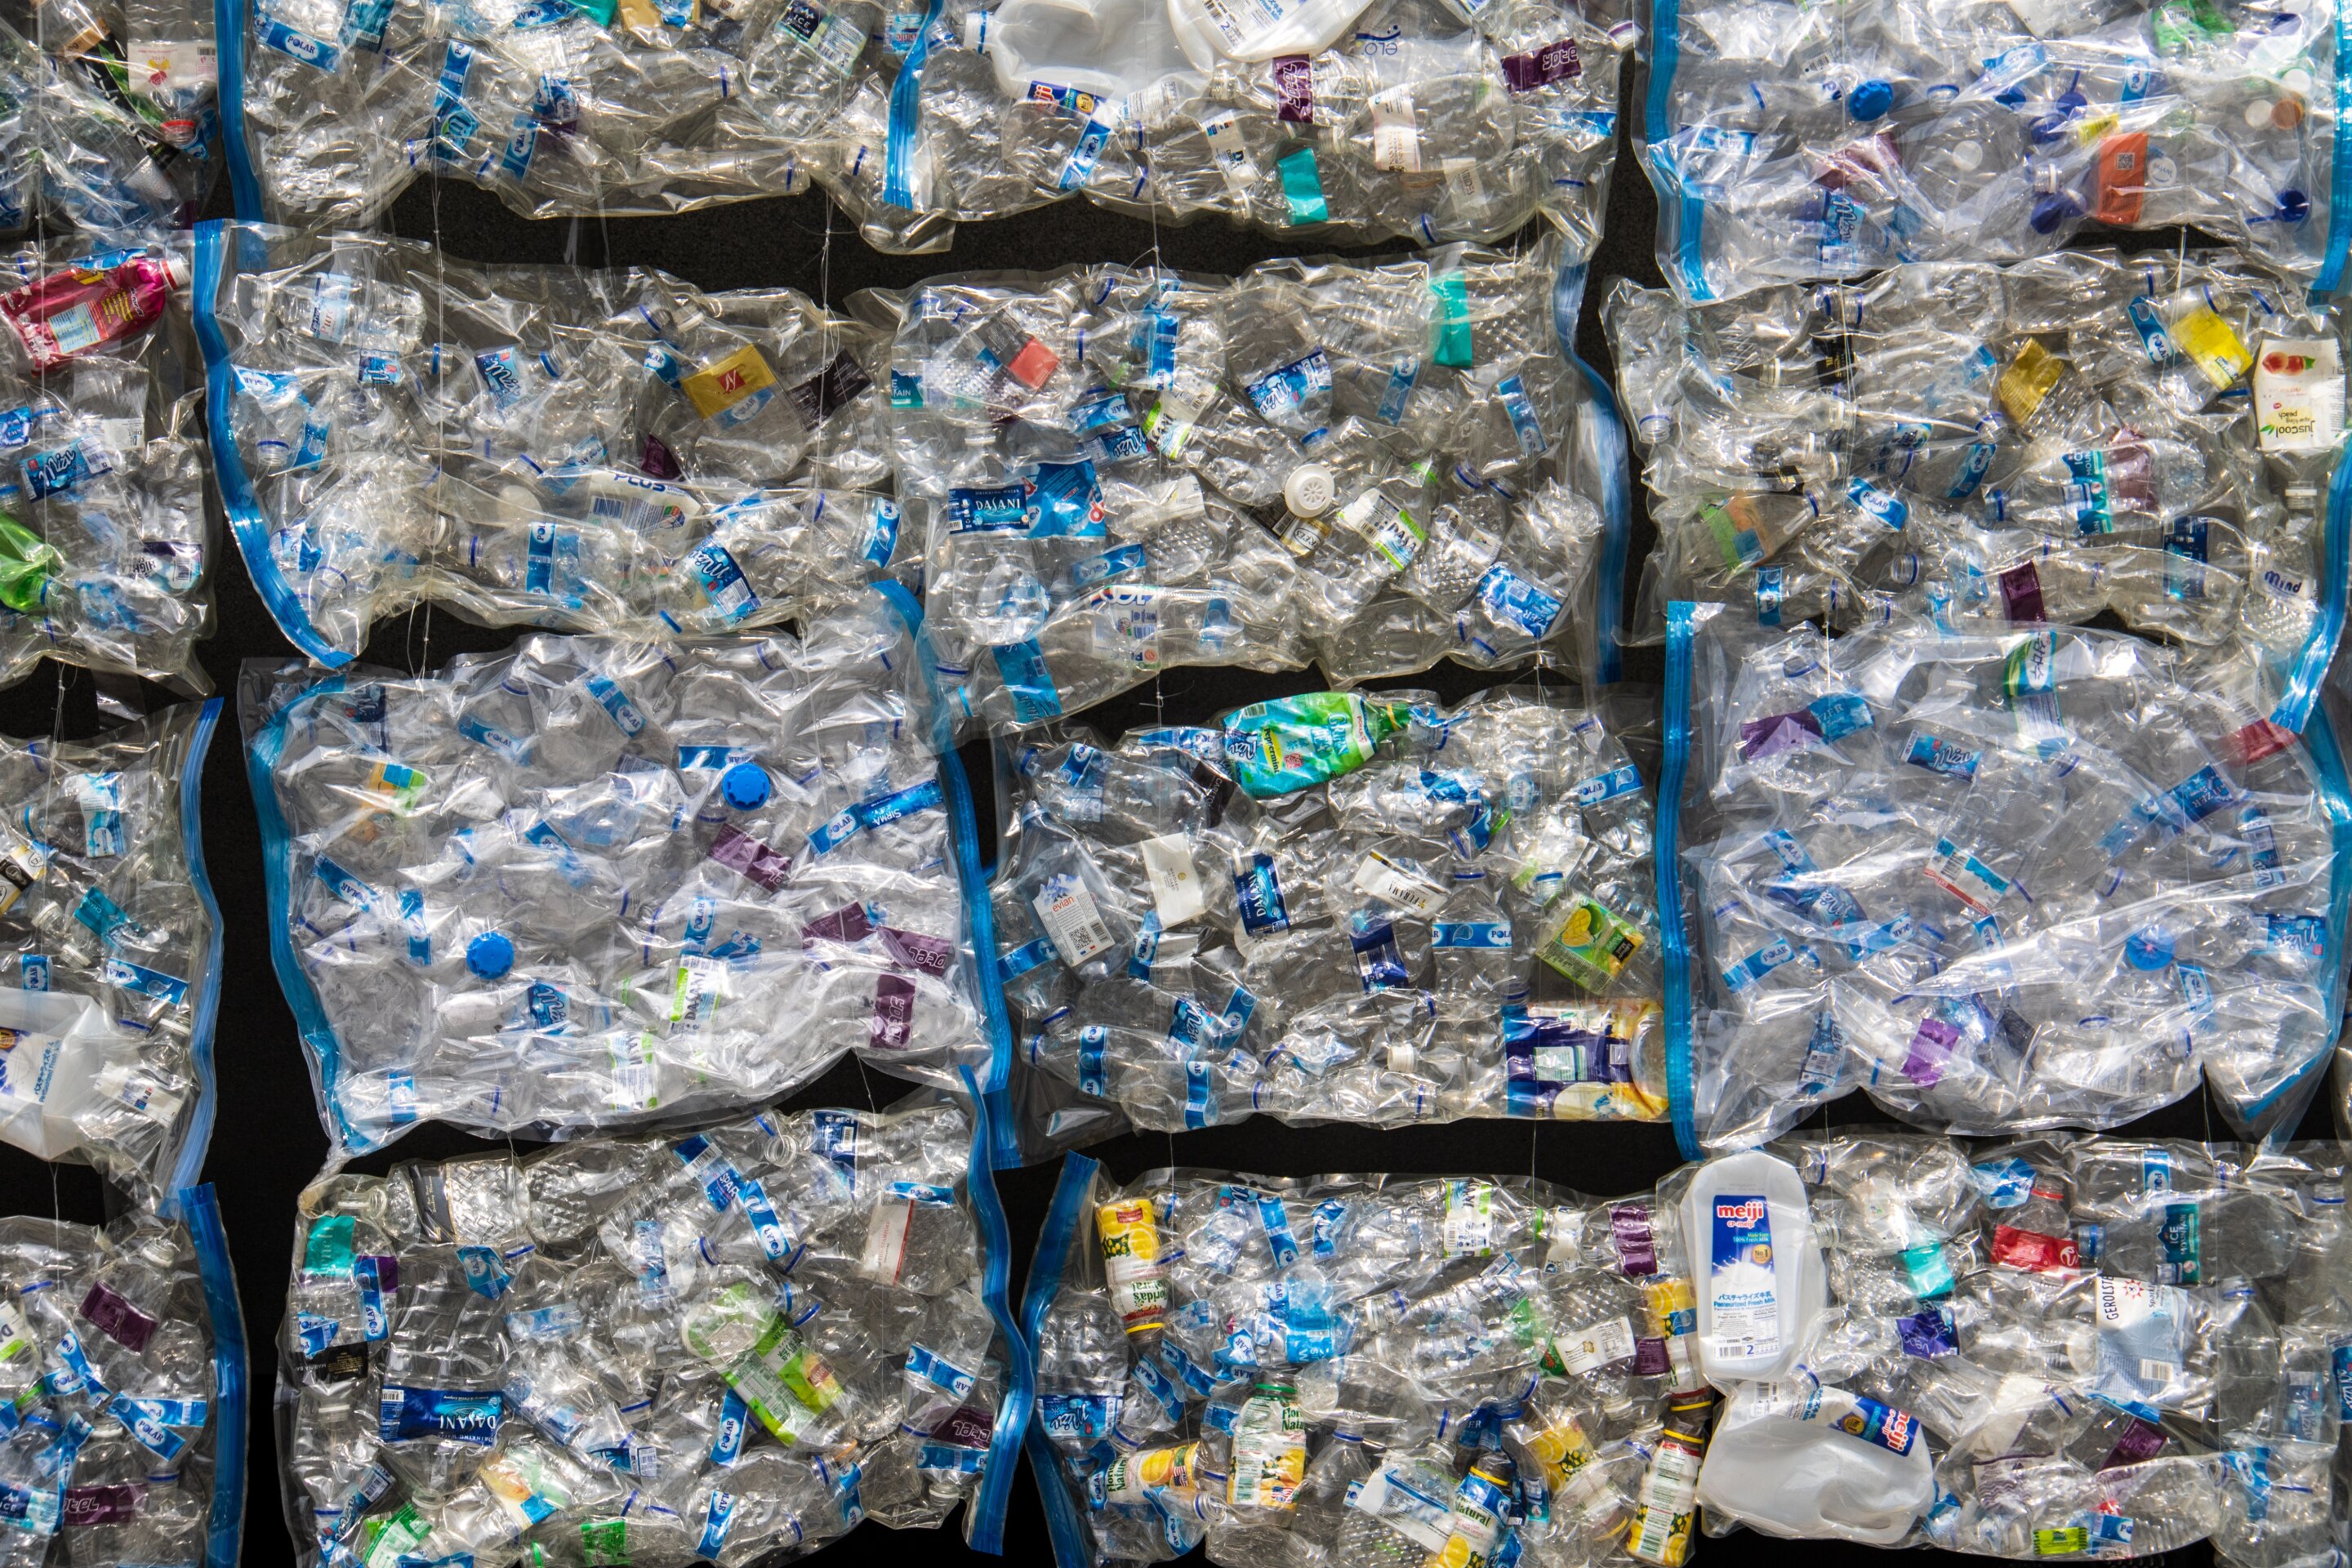 Consumers angry at retail industry for producing plastic waste, study finds